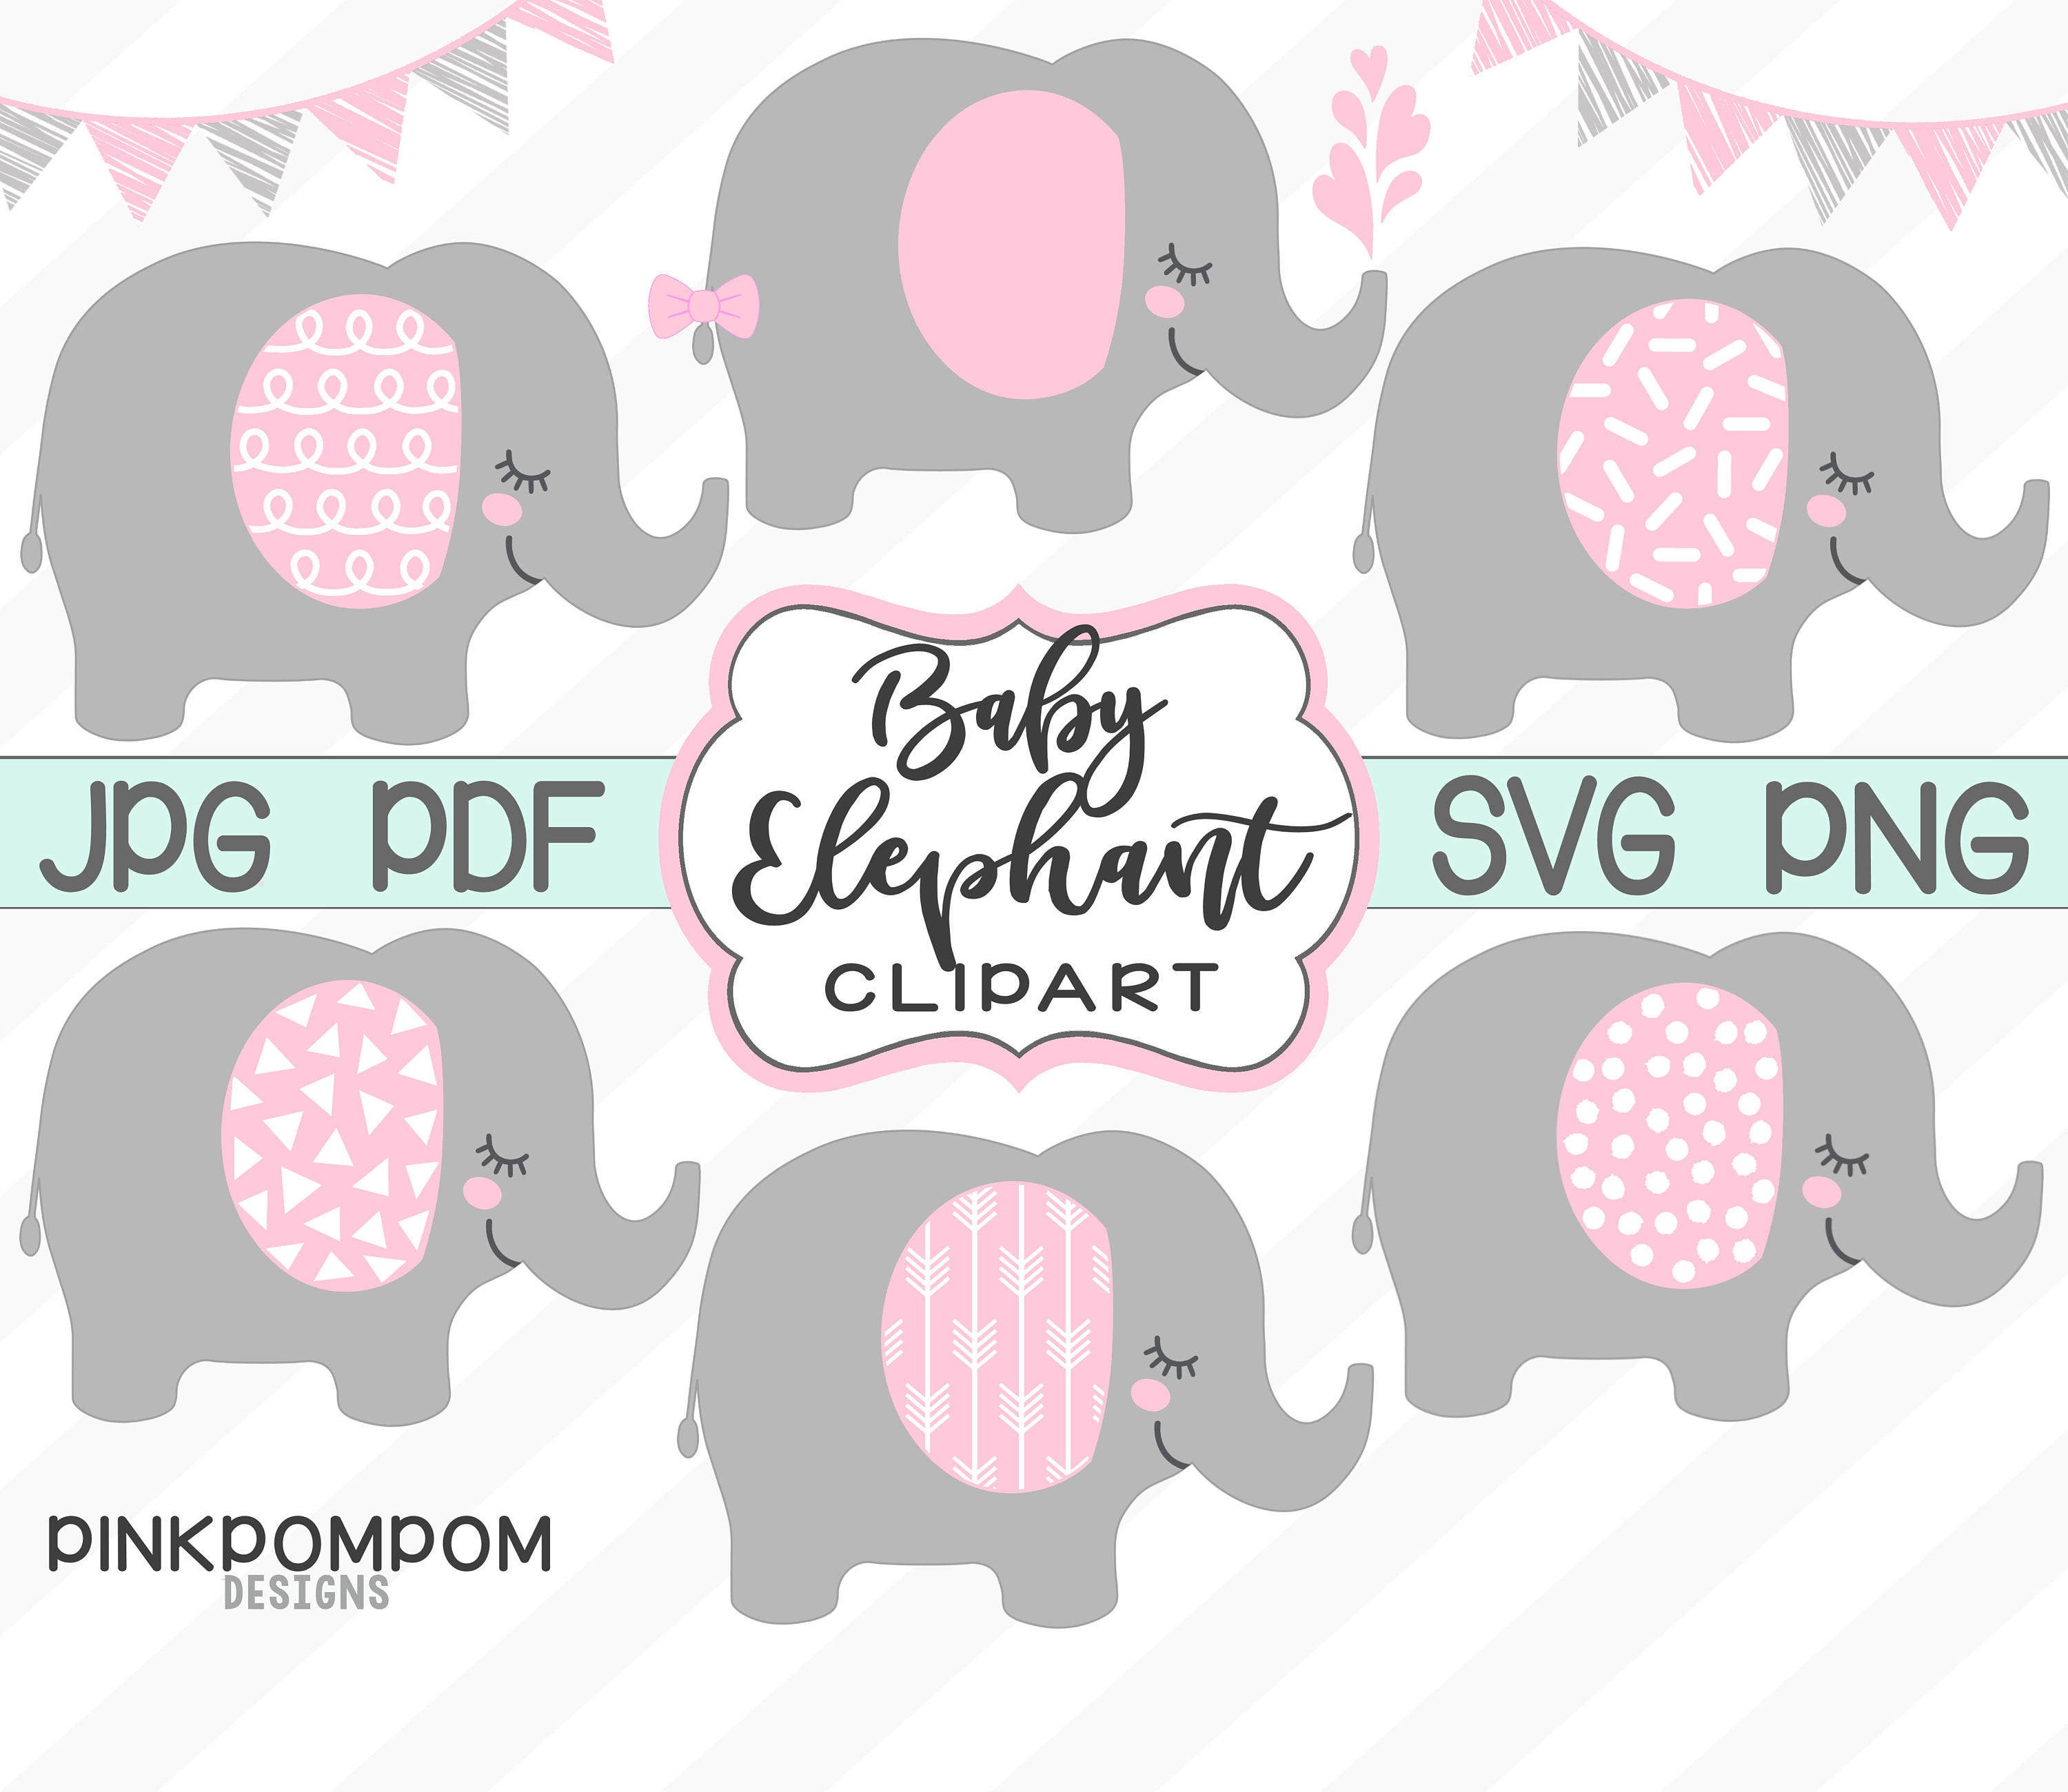 Download Baby Elephant SVG pink gray elephant clipart baby shower